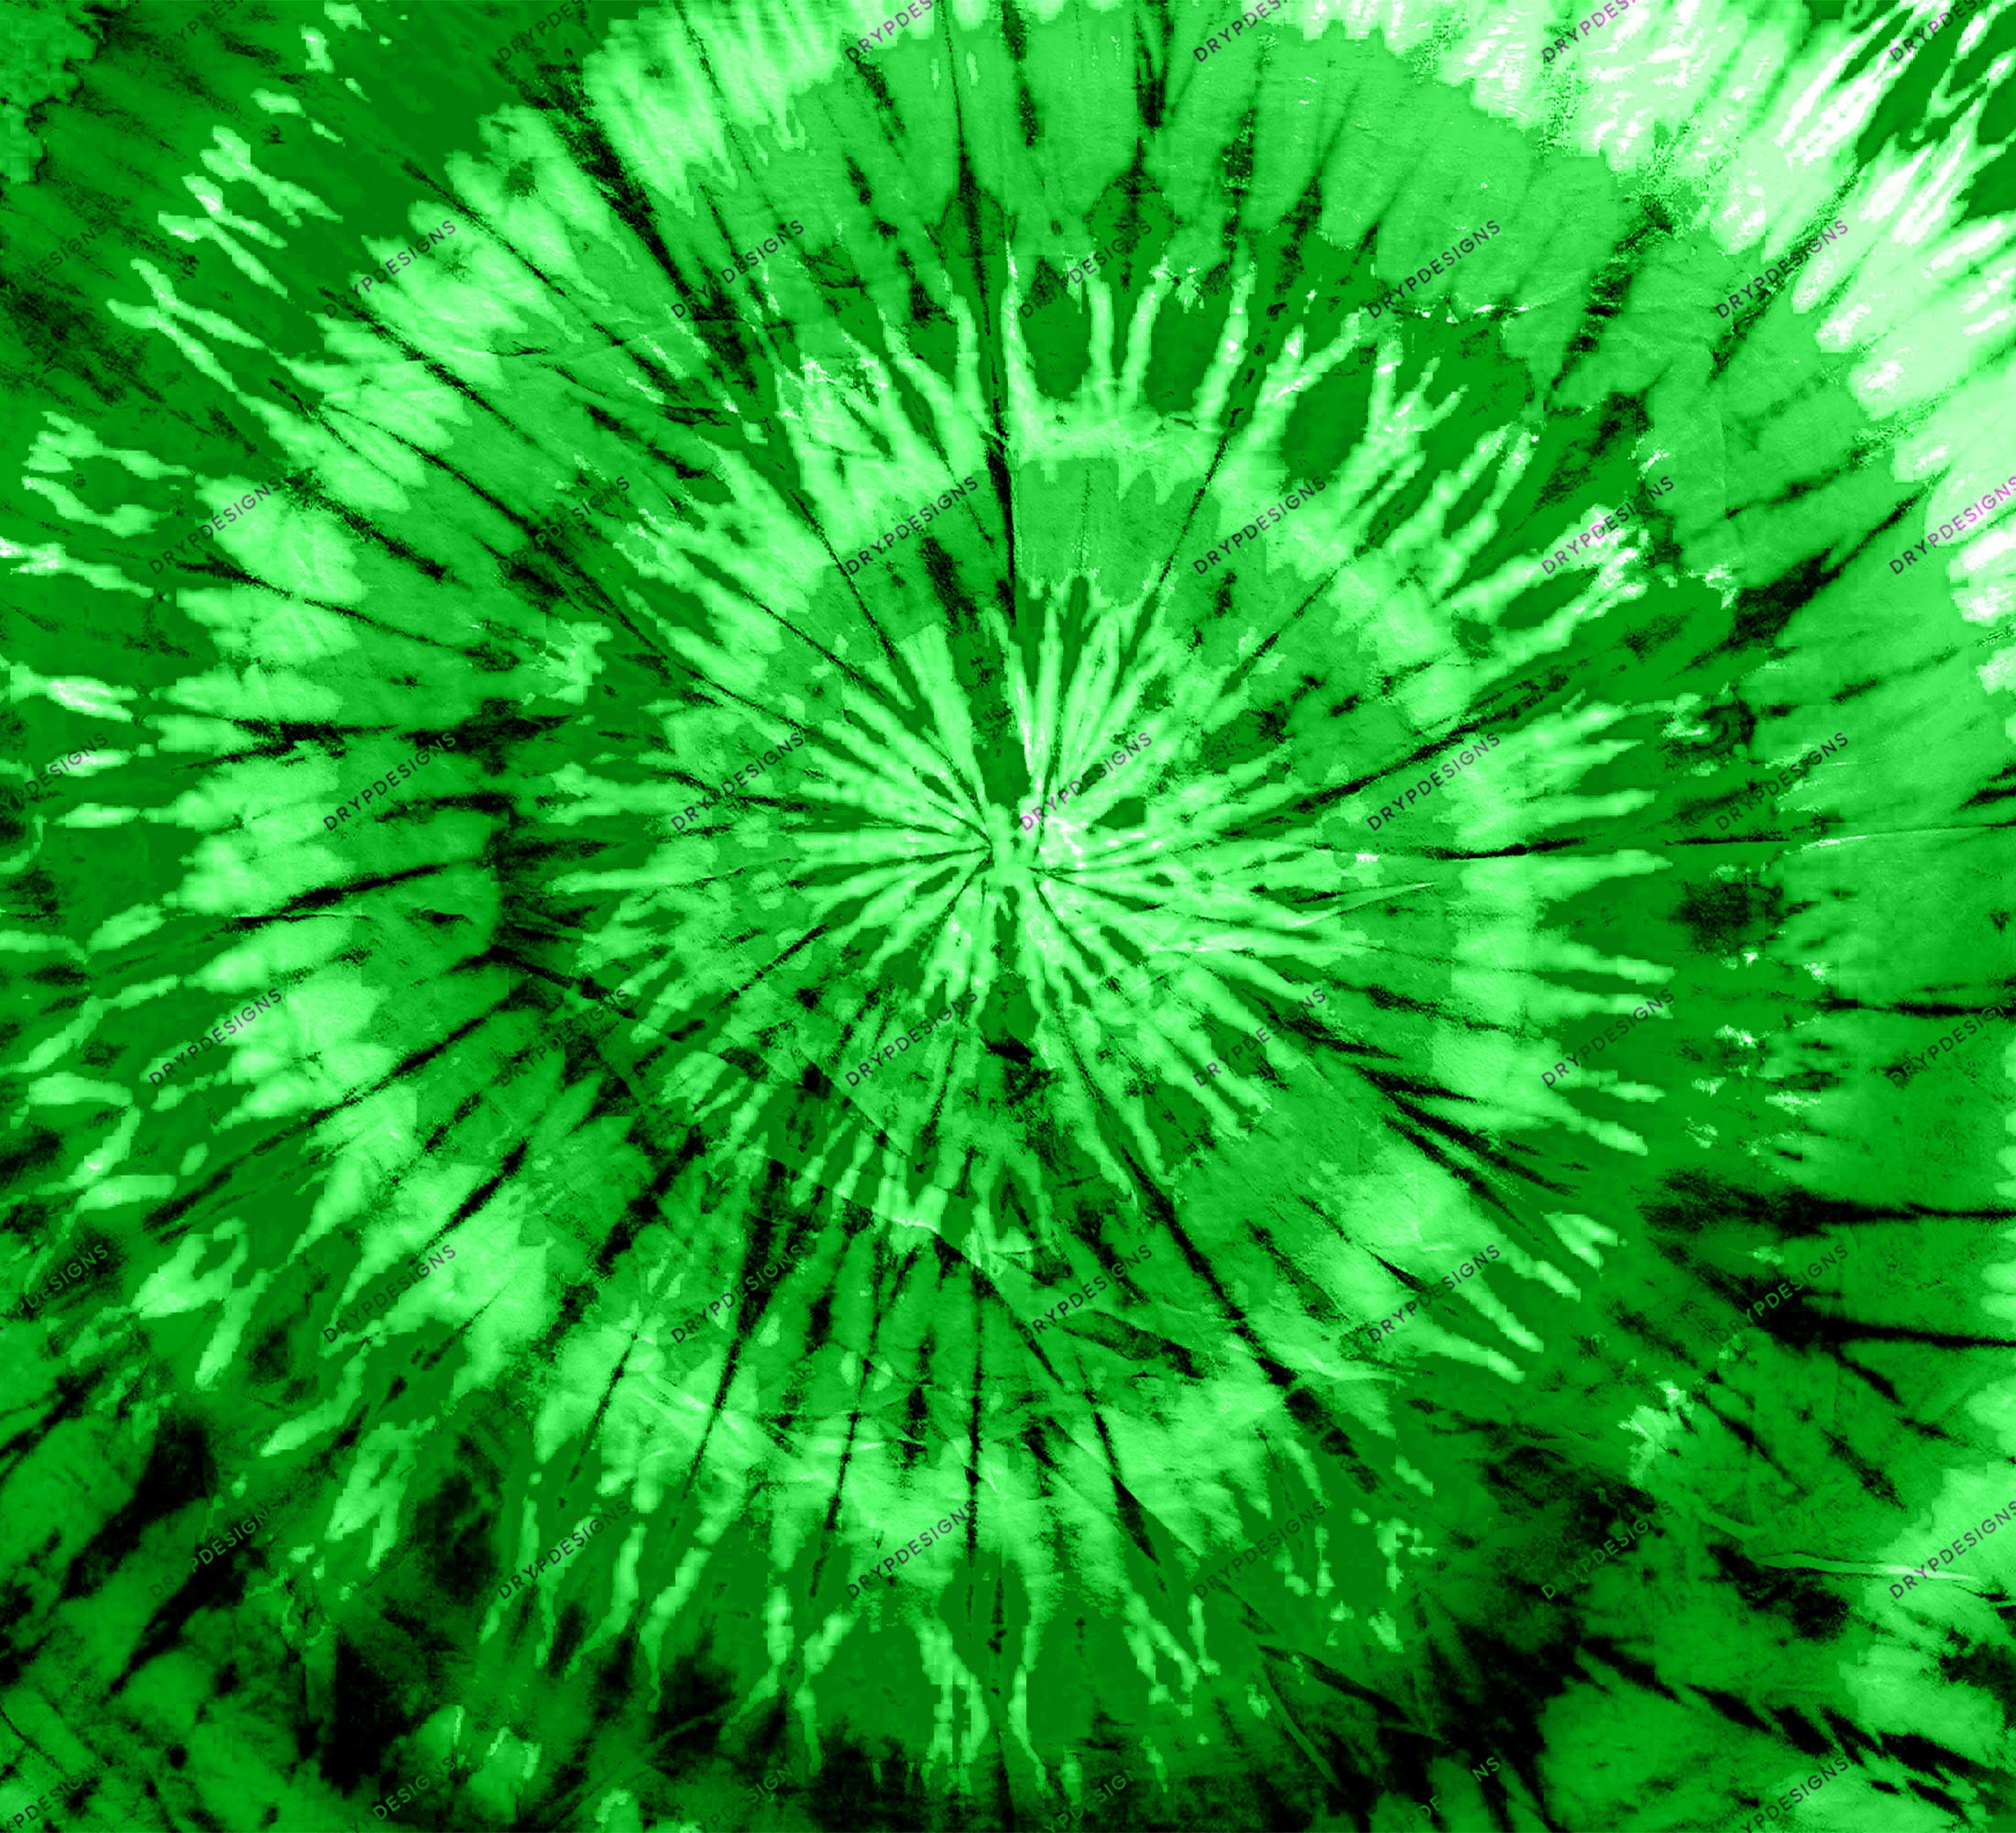 Download 1000+ Tie dye background green For phone and desktop for free